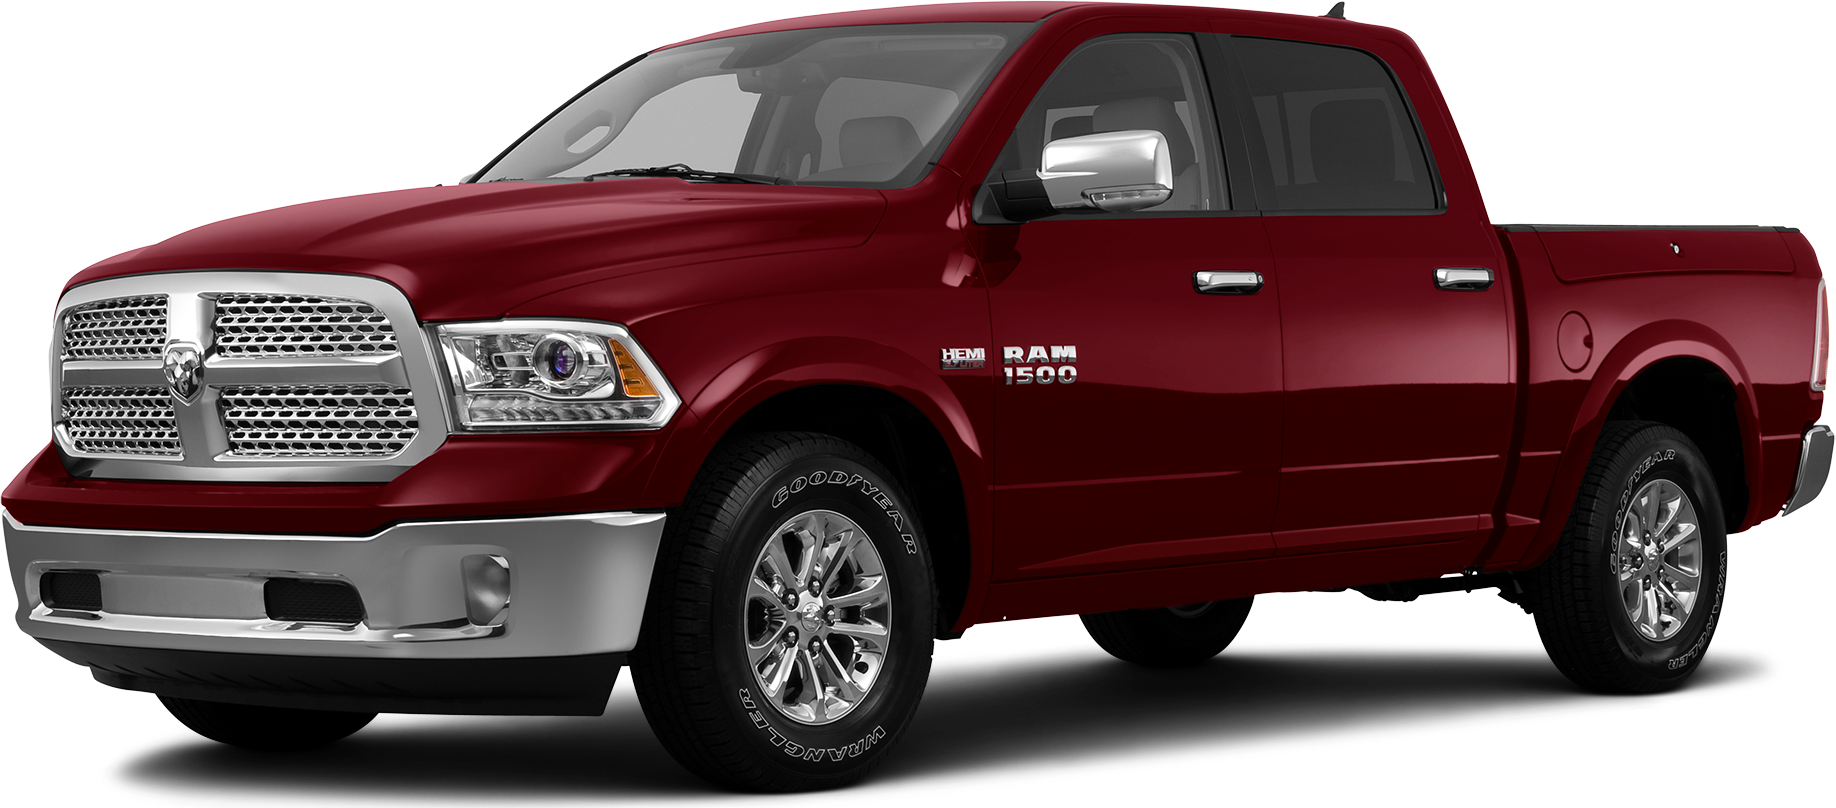 2013 Ram 1500 Crew Cab Price Value Ratings And Reviews Kelley Blue Book